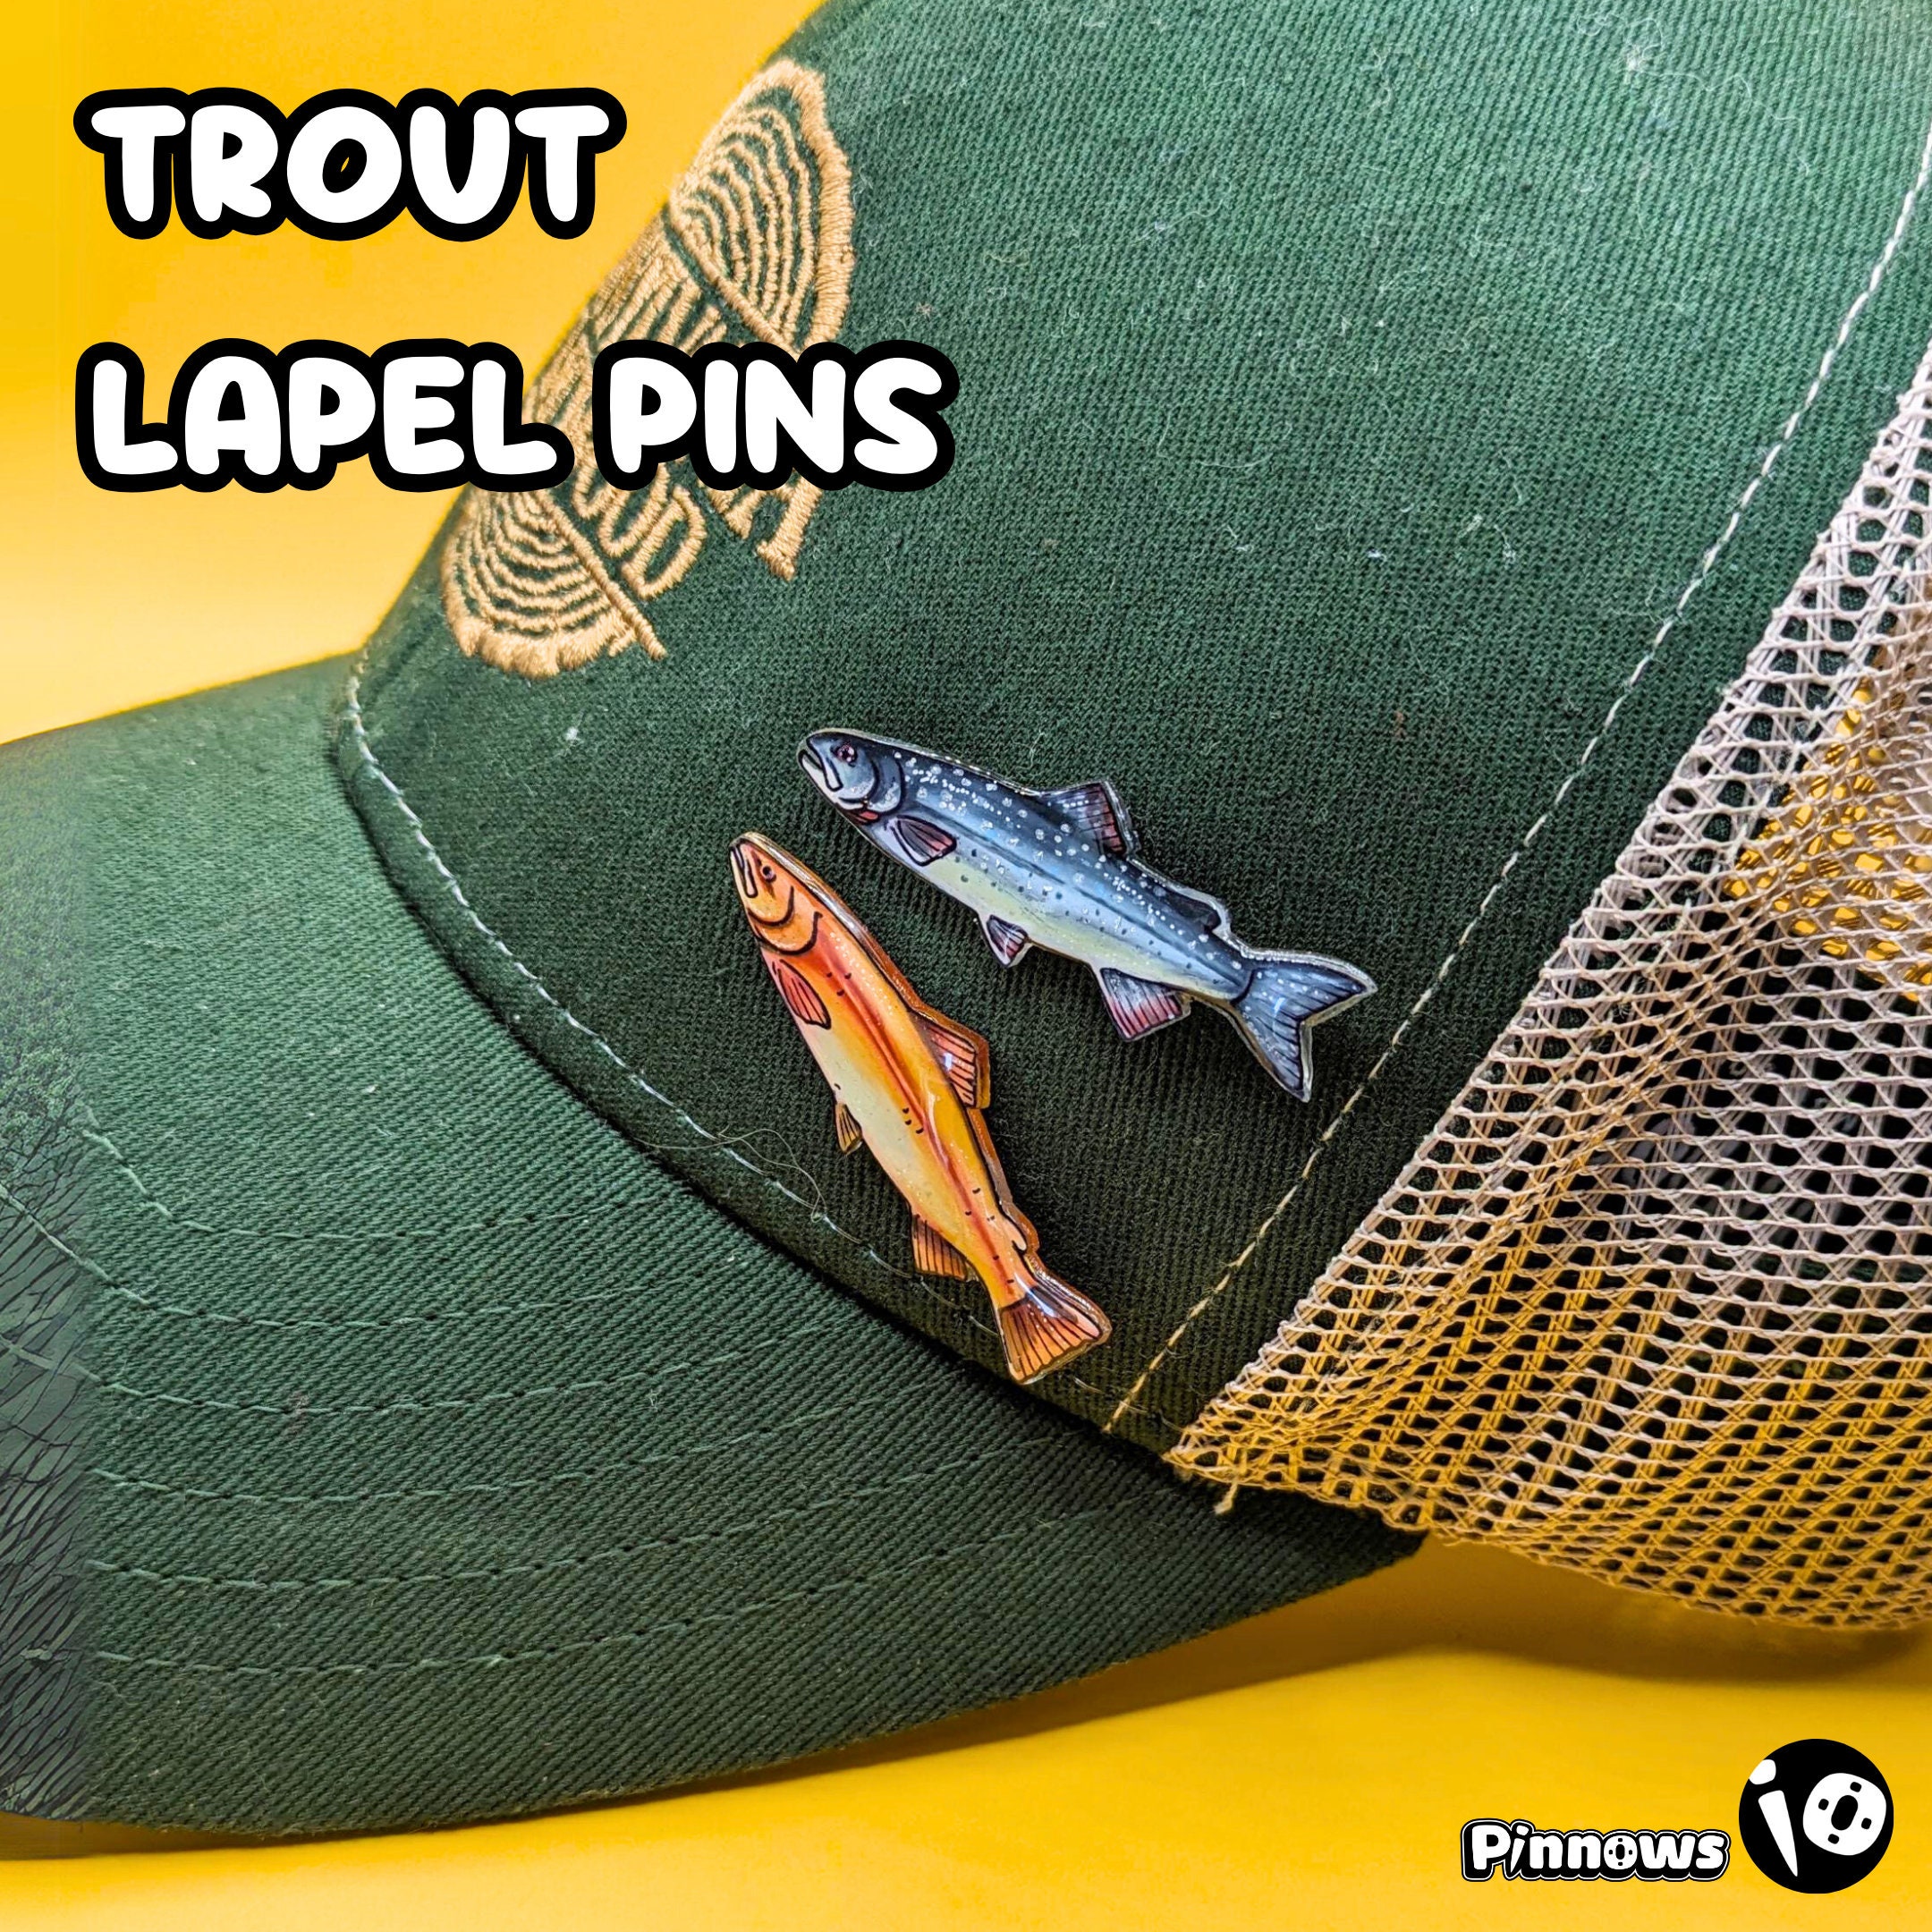 Trout Fish Lapel Pins - Mix & Match from 5 Different Designs!